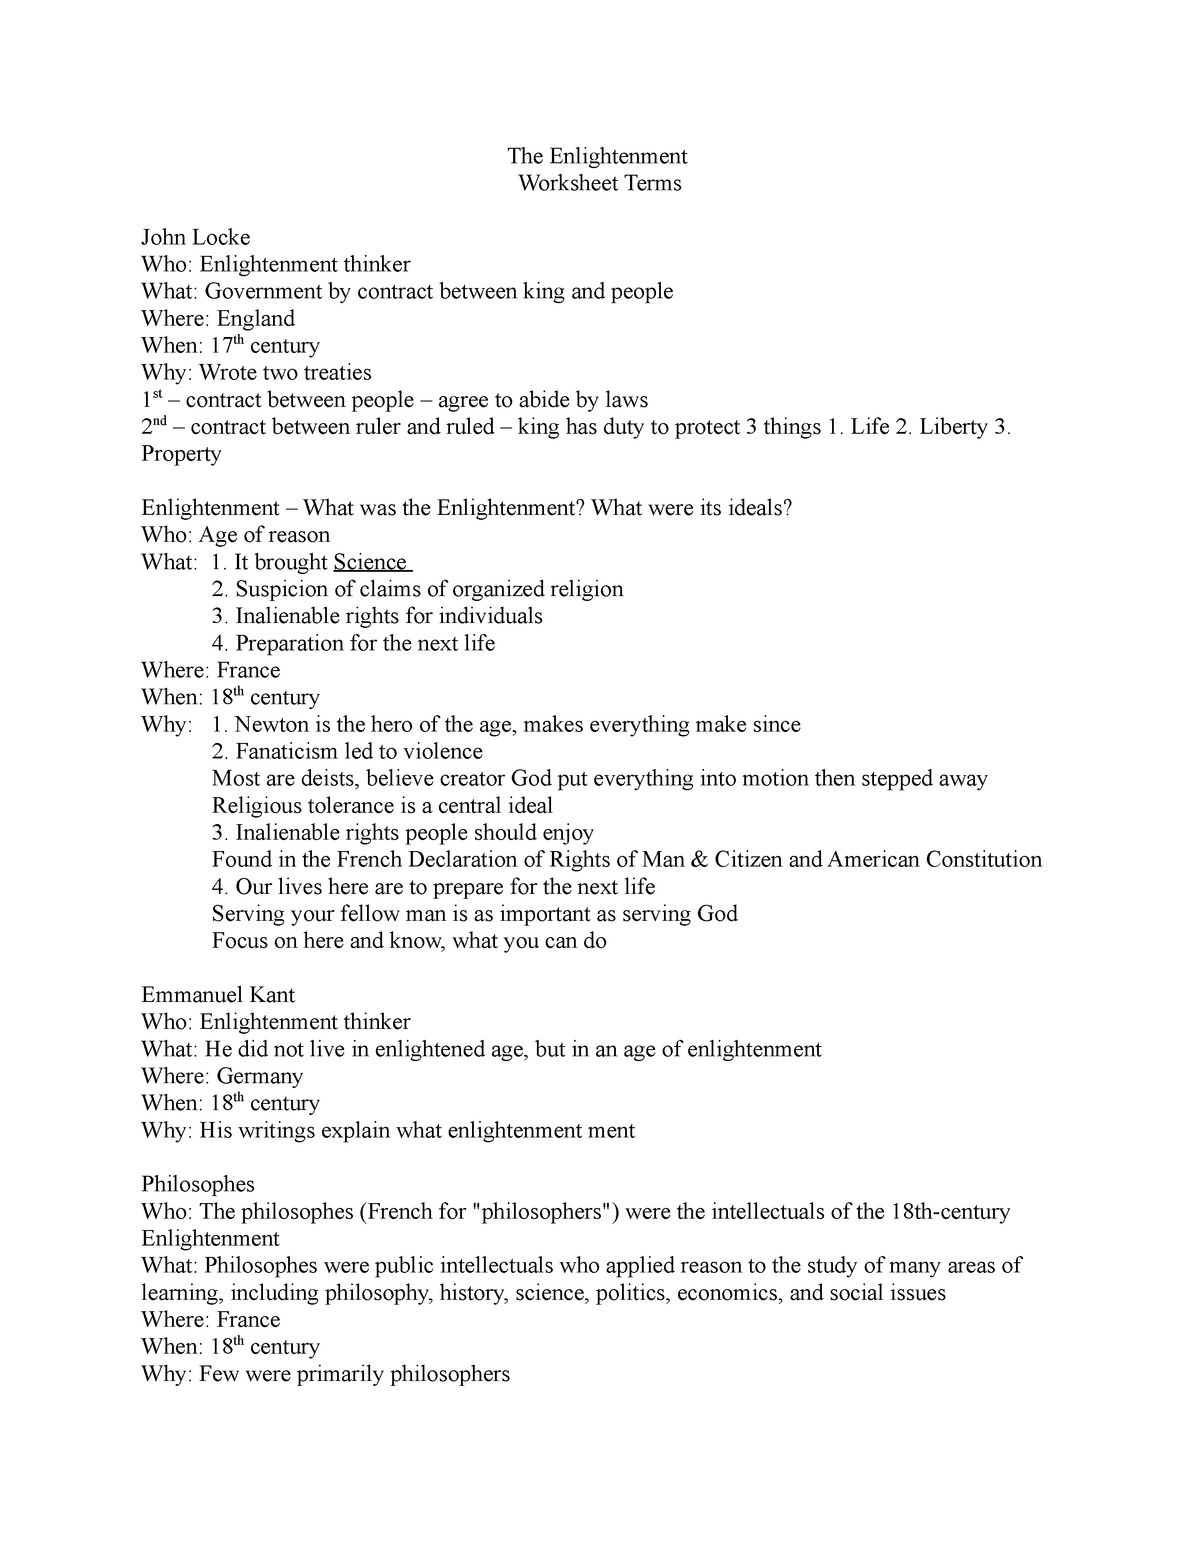 the-enlightenment-worksheet-terms-the-enlightenment-worksheet-terms-john-locke-who